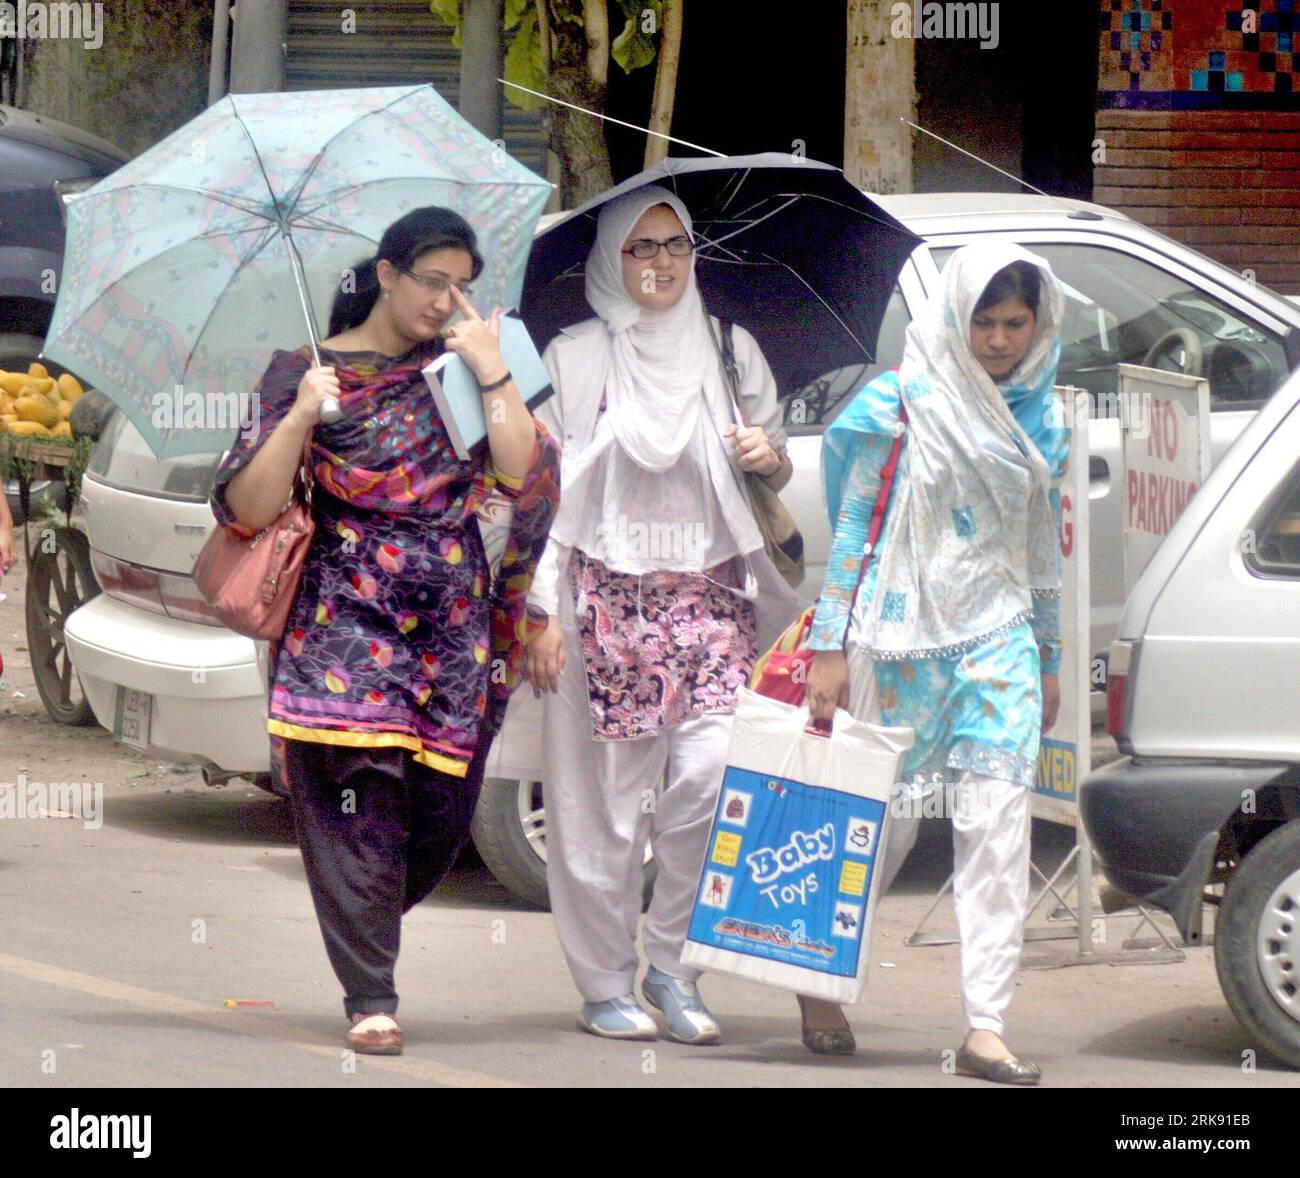 Bildnummer: 54104428  Datum: 03.06.2010  Copyright: imago/Xinhua (100603) -- LAHORE, June 3, 2010 (Xinhua) -- Girls hold umbrella to protect themselves from hot weather in eastern Pakistani city of Lahore on June 3, 2010. Heat wave in Pakistan has killed at least 18 since the beginning of May. Authorities have warned to stay out of the midday sun. (Xinhua Photo/Jamil Ahmad) (cl) (7)PAKISTAN-LAHORE-HEAT WAVE PUBLICATIONxNOTxINxCHN Gesellschaft Hitze Hitzewelle Kinder kbdig xdp 2010 quadrat o0 Schirm Sonnenschutz o00 Sonnenschirm    Bildnummer 54104428 Date 03 06 2010 Copyright Imago XINHUA  Lah Stock Photo